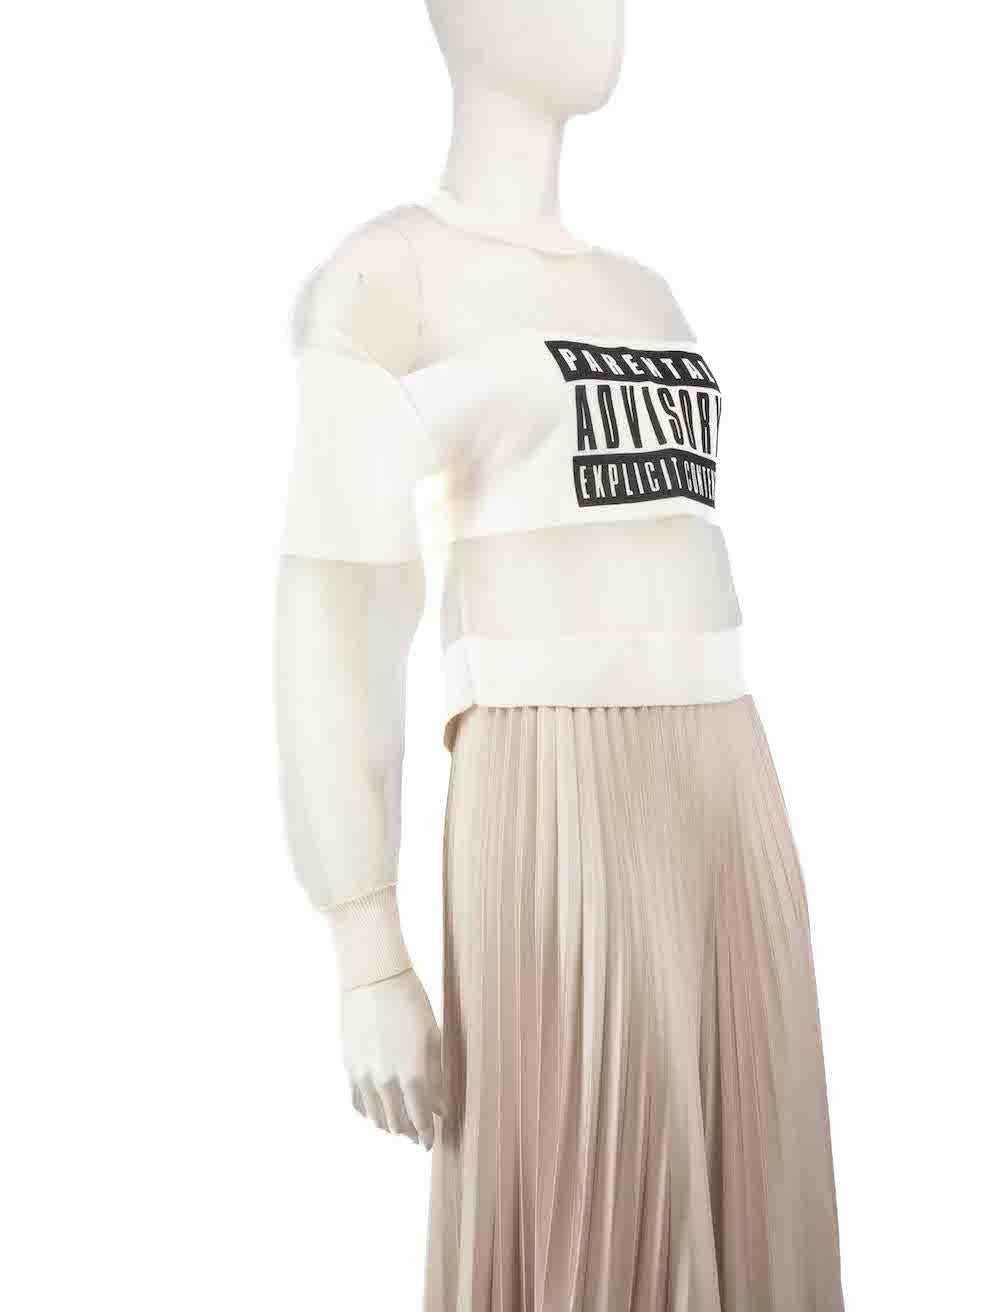 CONDITION is Good. Minor wear to knit is evident. Light wear to over all fabric with many discolouration marks seen throughout especially around the neckline on this used Alexander Wang designer resale item.
 
 
 
 Details
 
 
 Ecru
 
 Viscose
 
